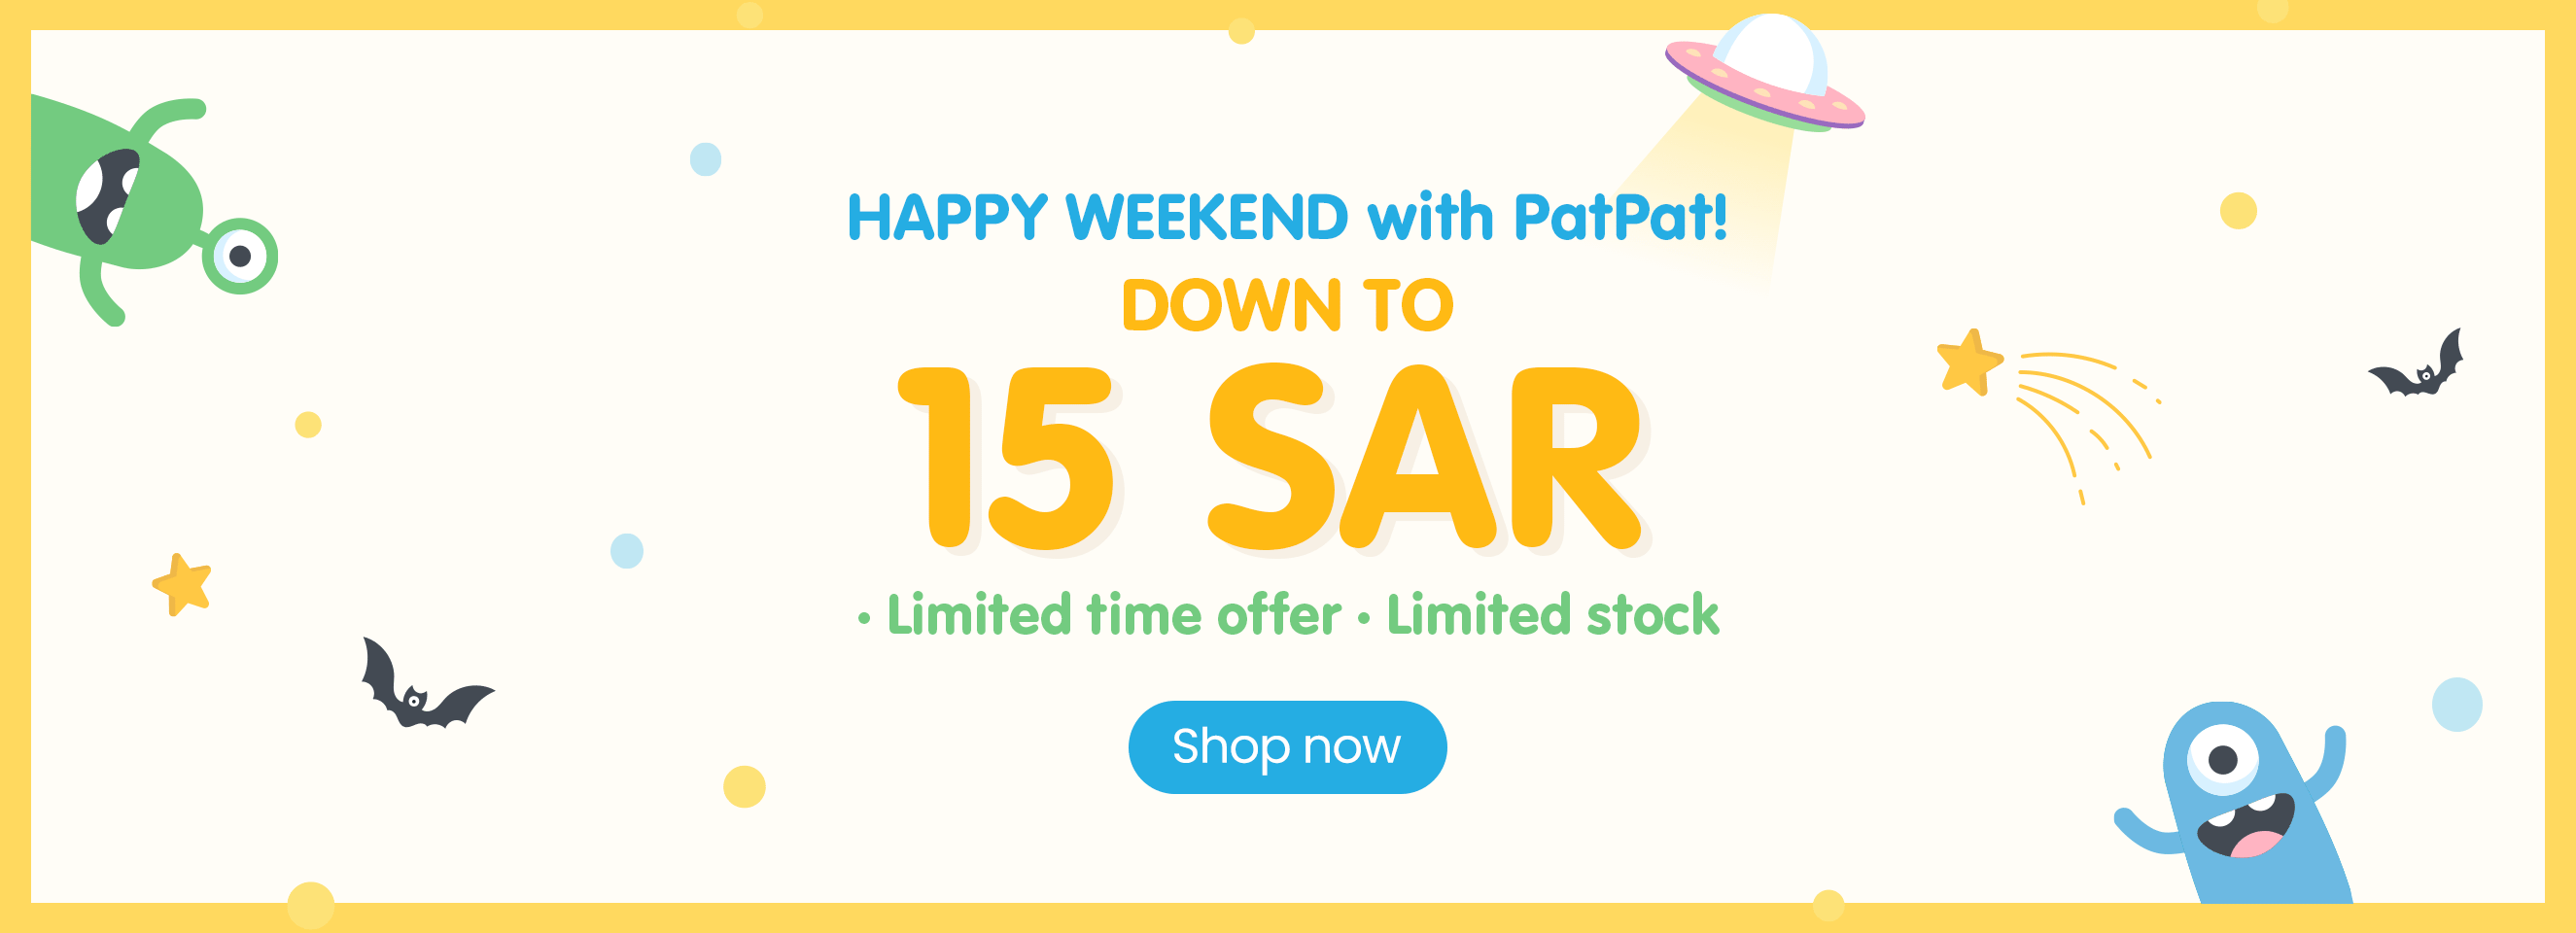 Click it to join Weekend Sale activity